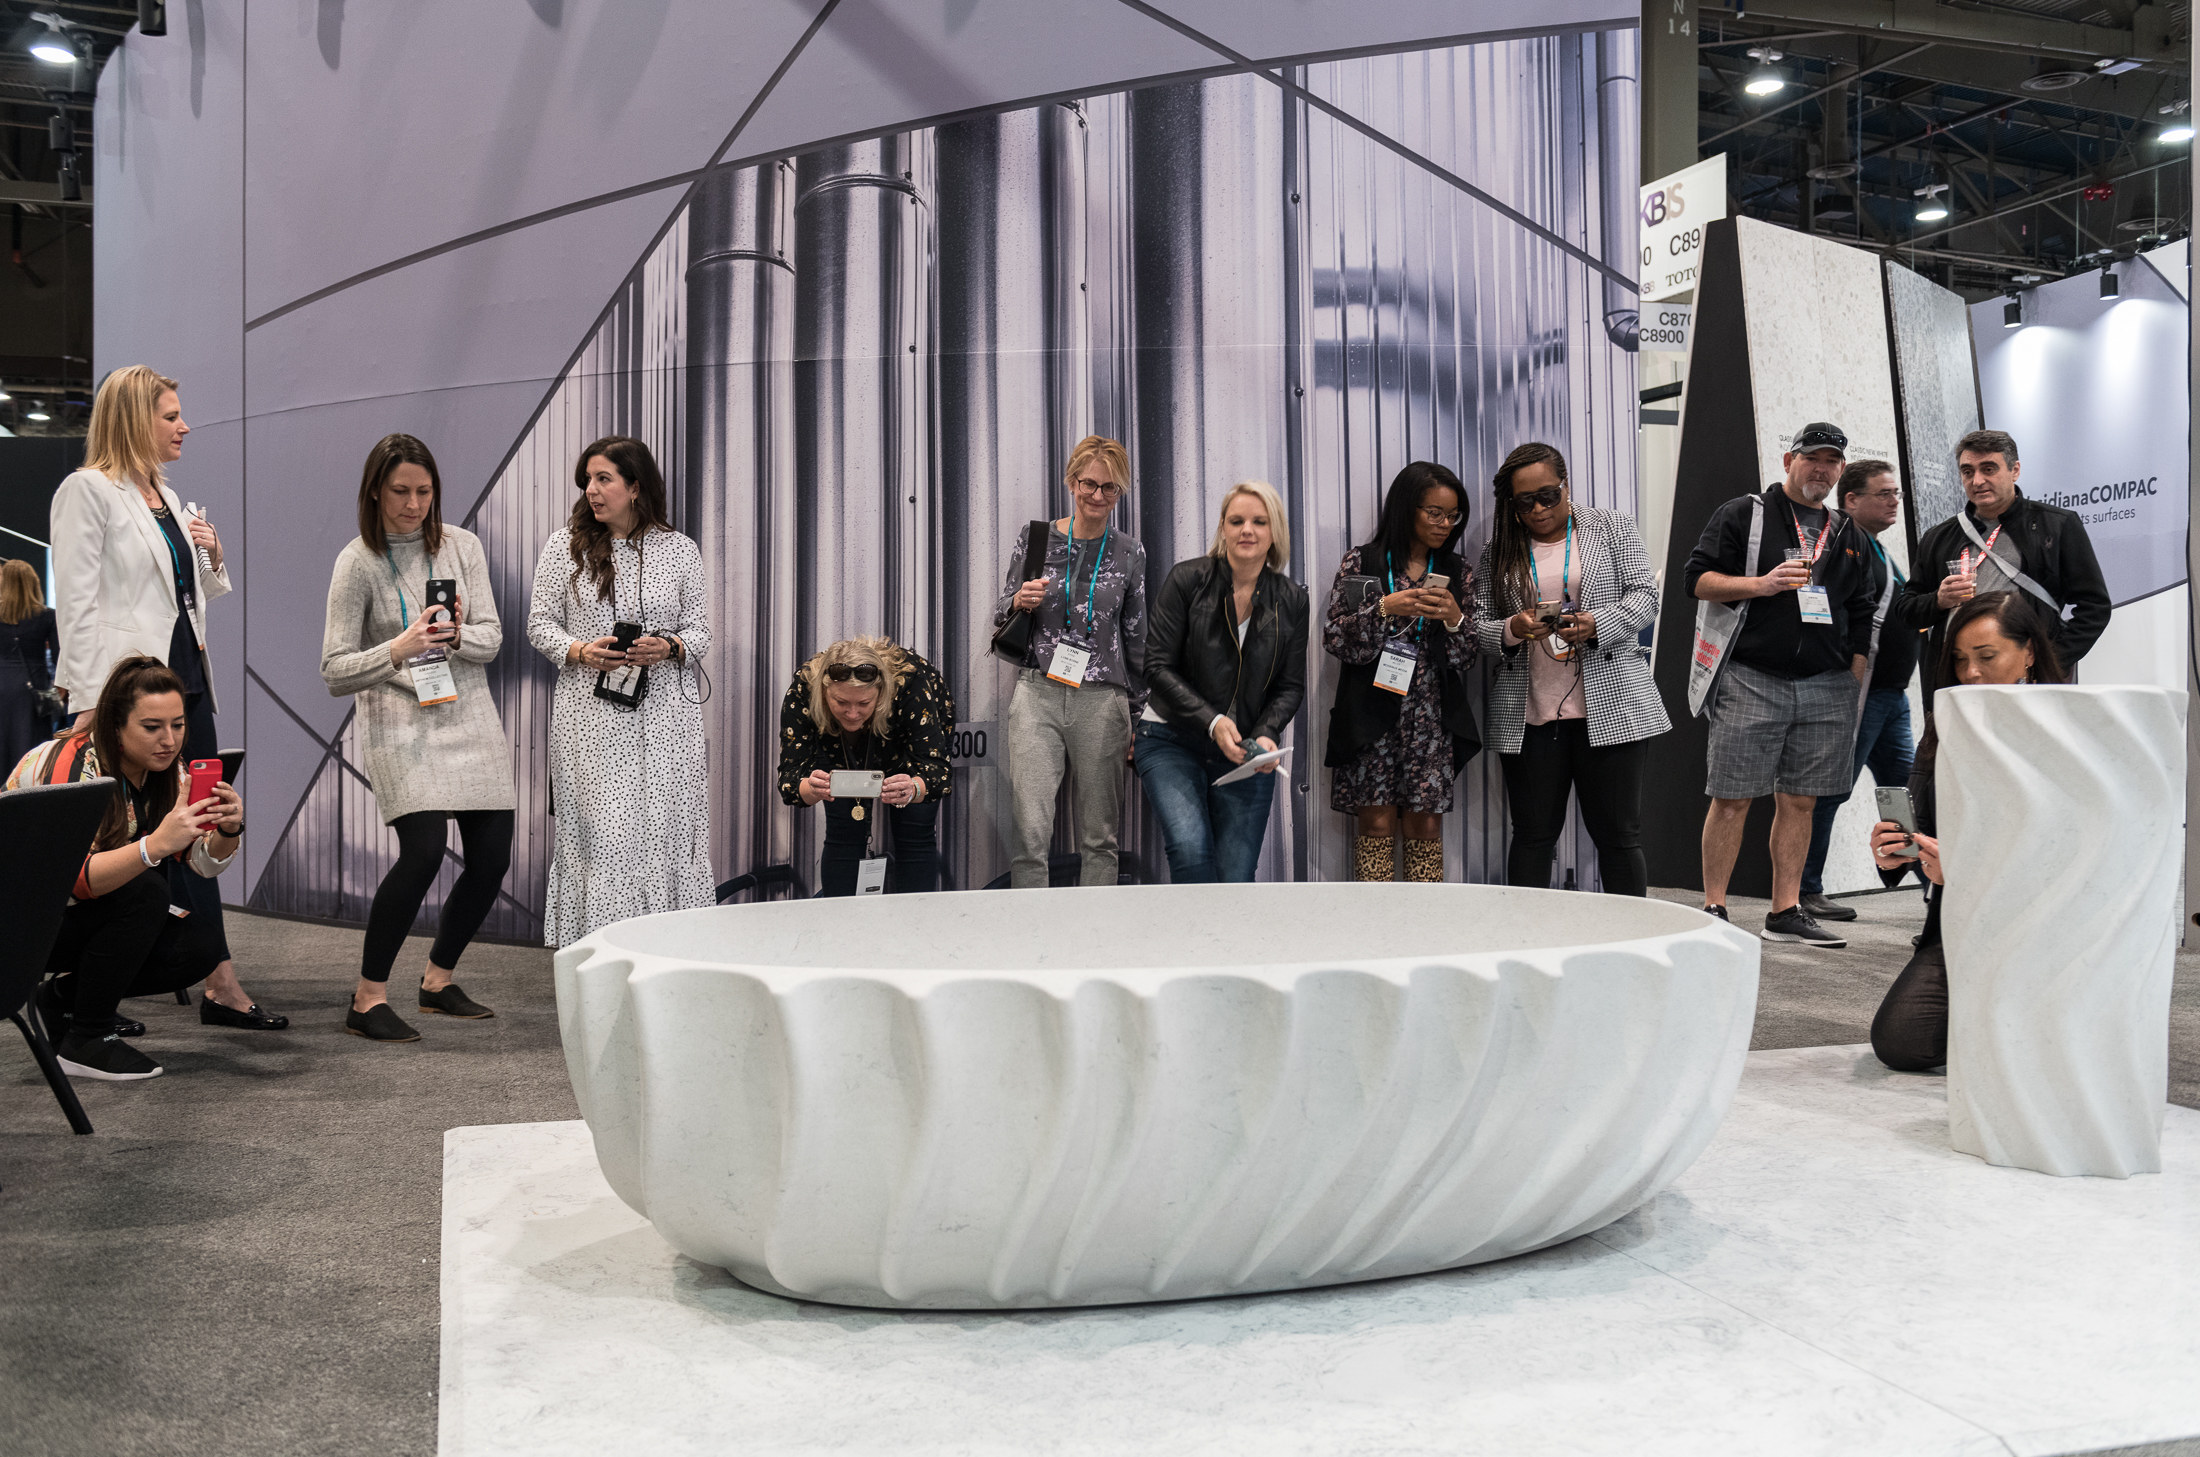 COMPAC presents new pieces at KBIS 2020.